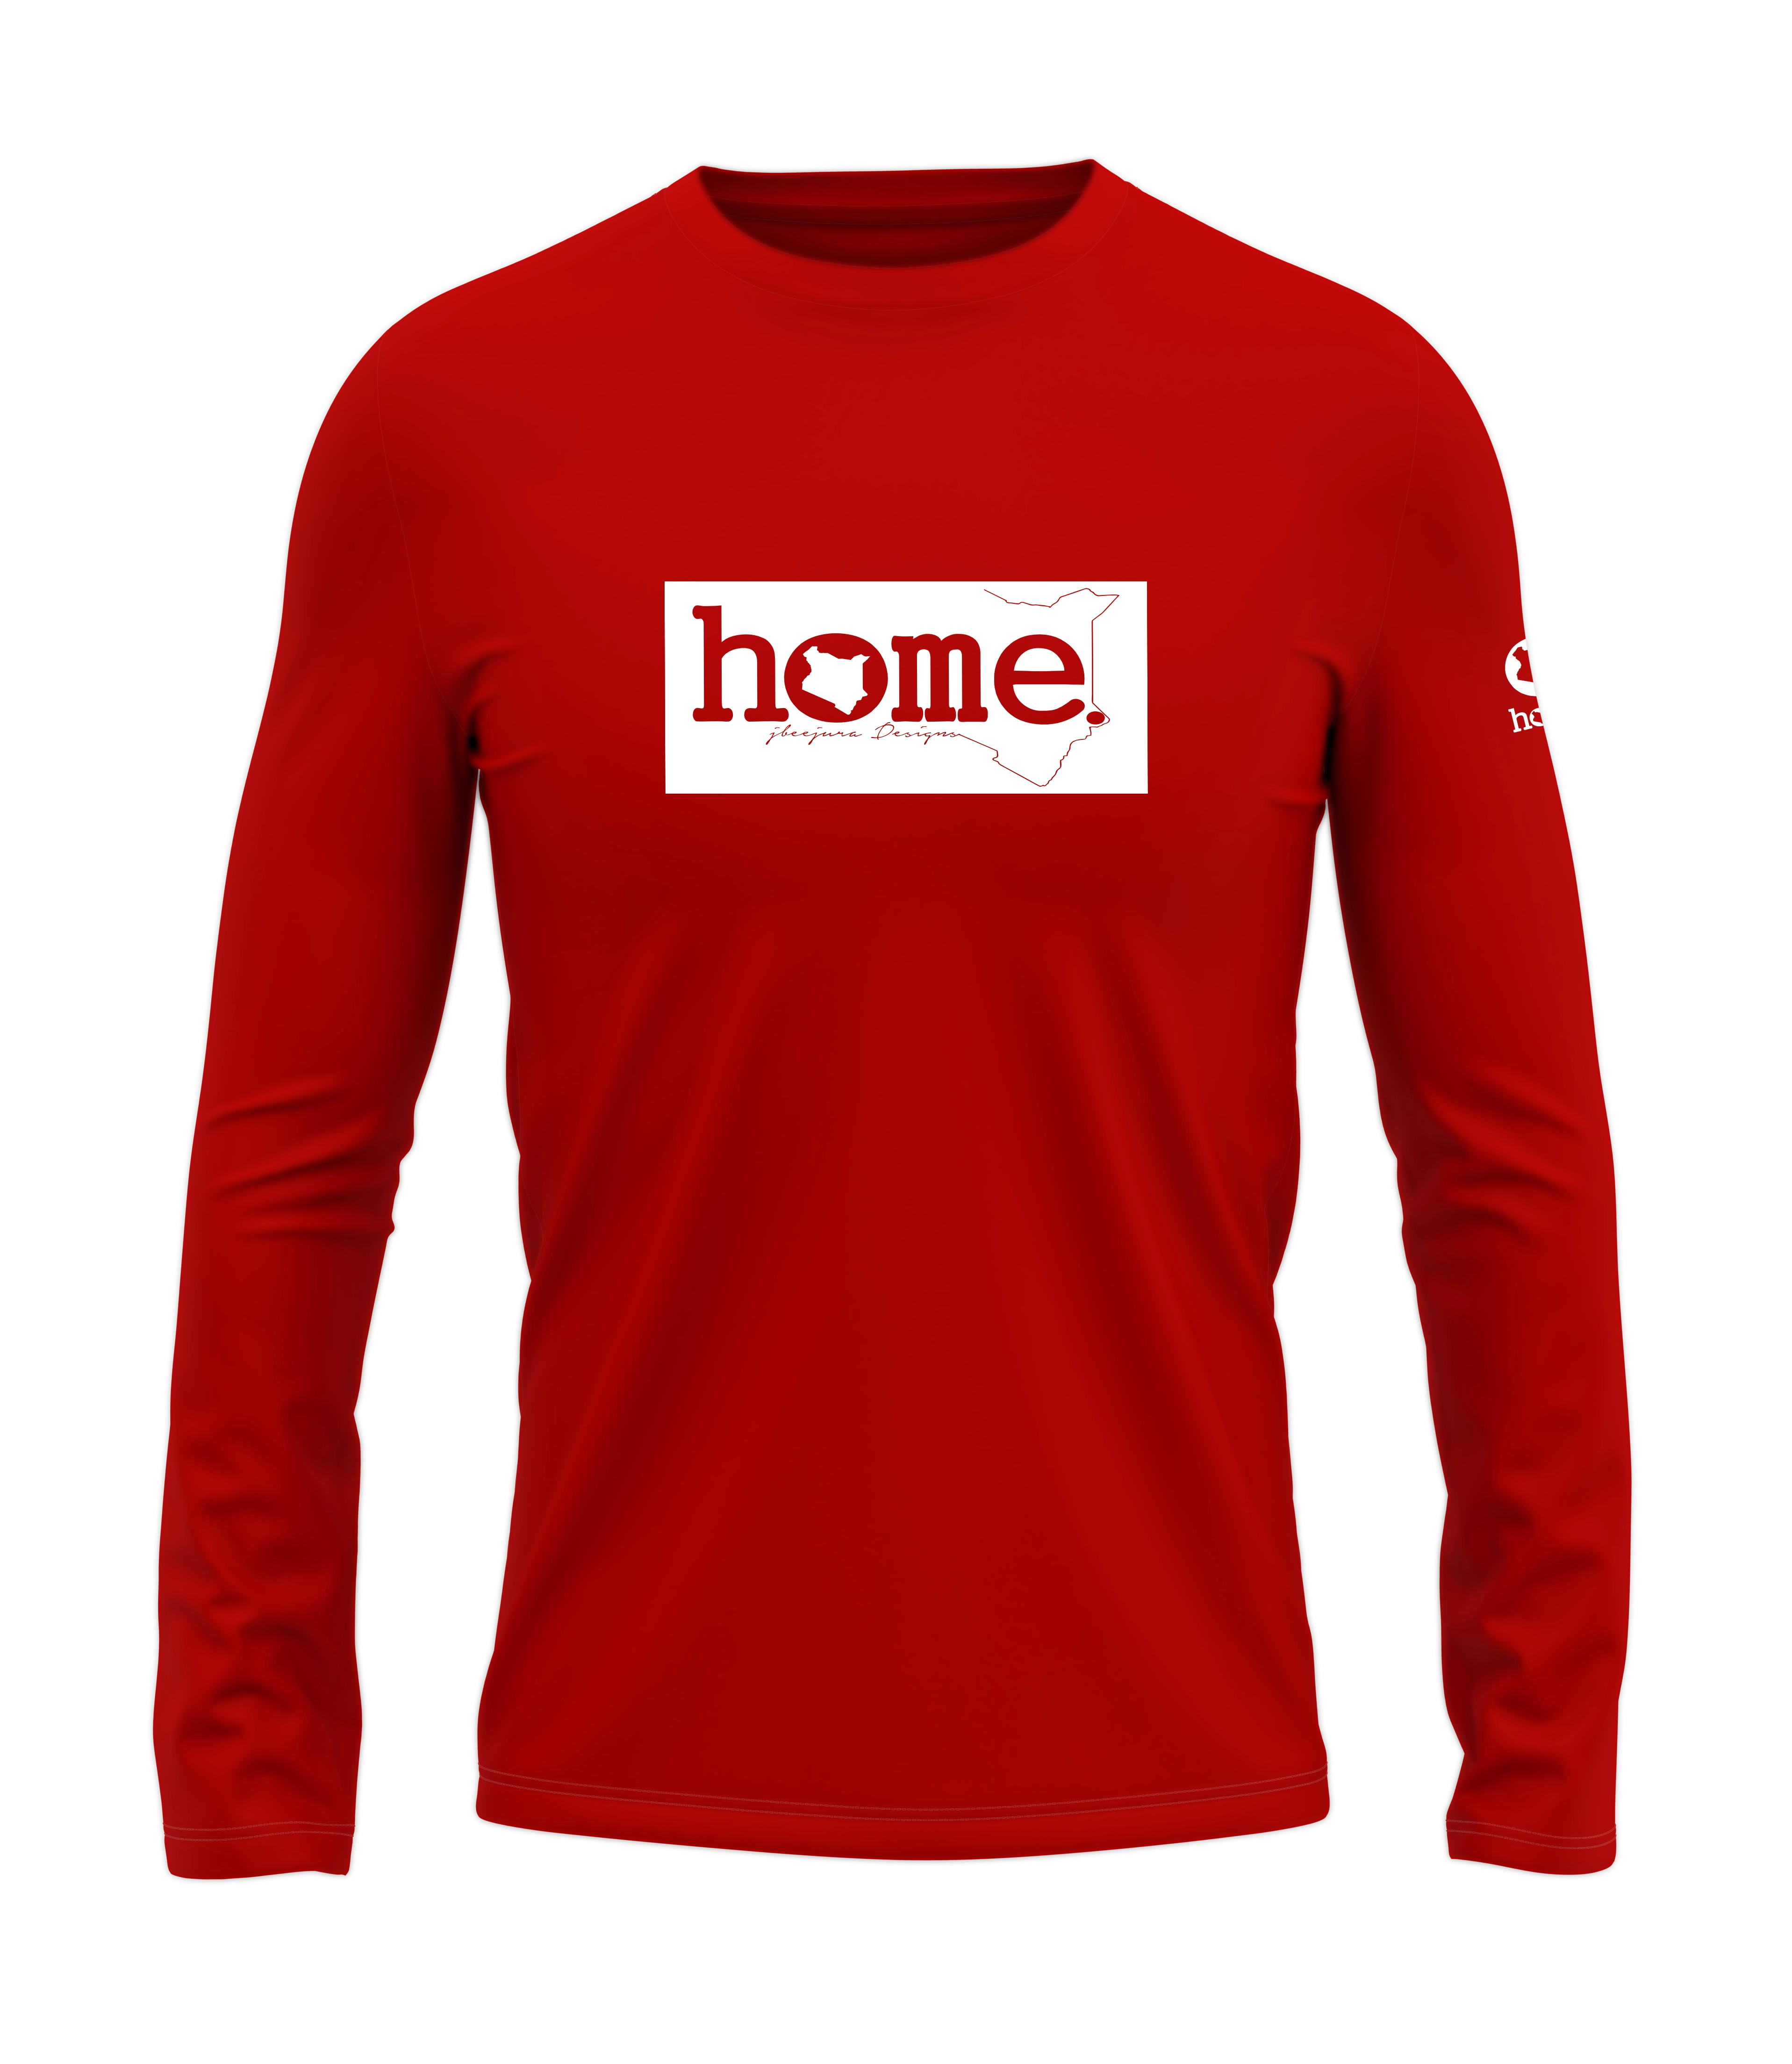 home_254 LONG-SLEEVED RED T-SHIRT WITH A WHITE CLASSIC PRINT – COTTON PLUS FABRIC